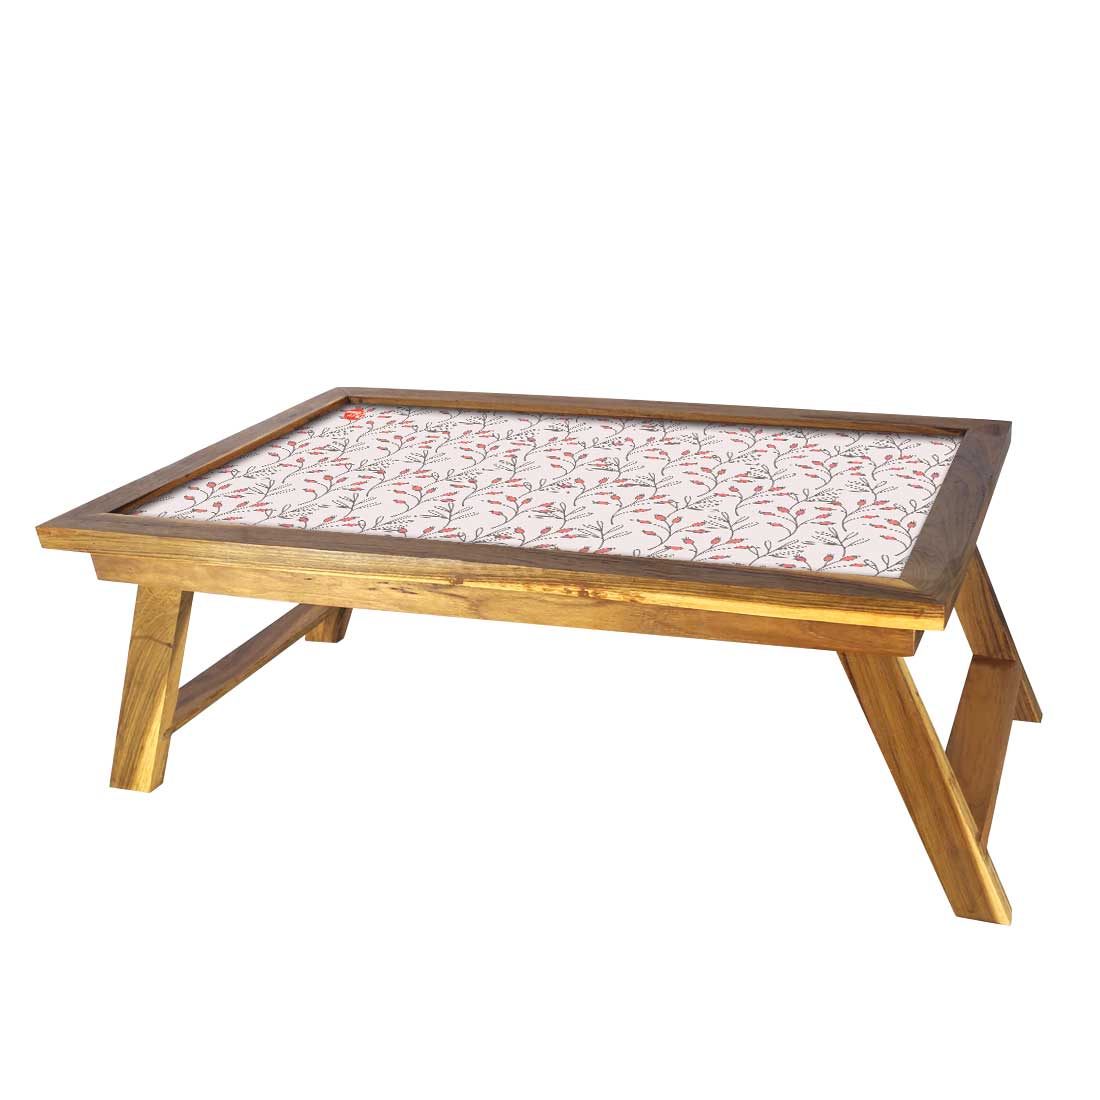 Wooden Bed Breakfast Tray for Home Eating Study Table - Beautiful Floral Nutcase